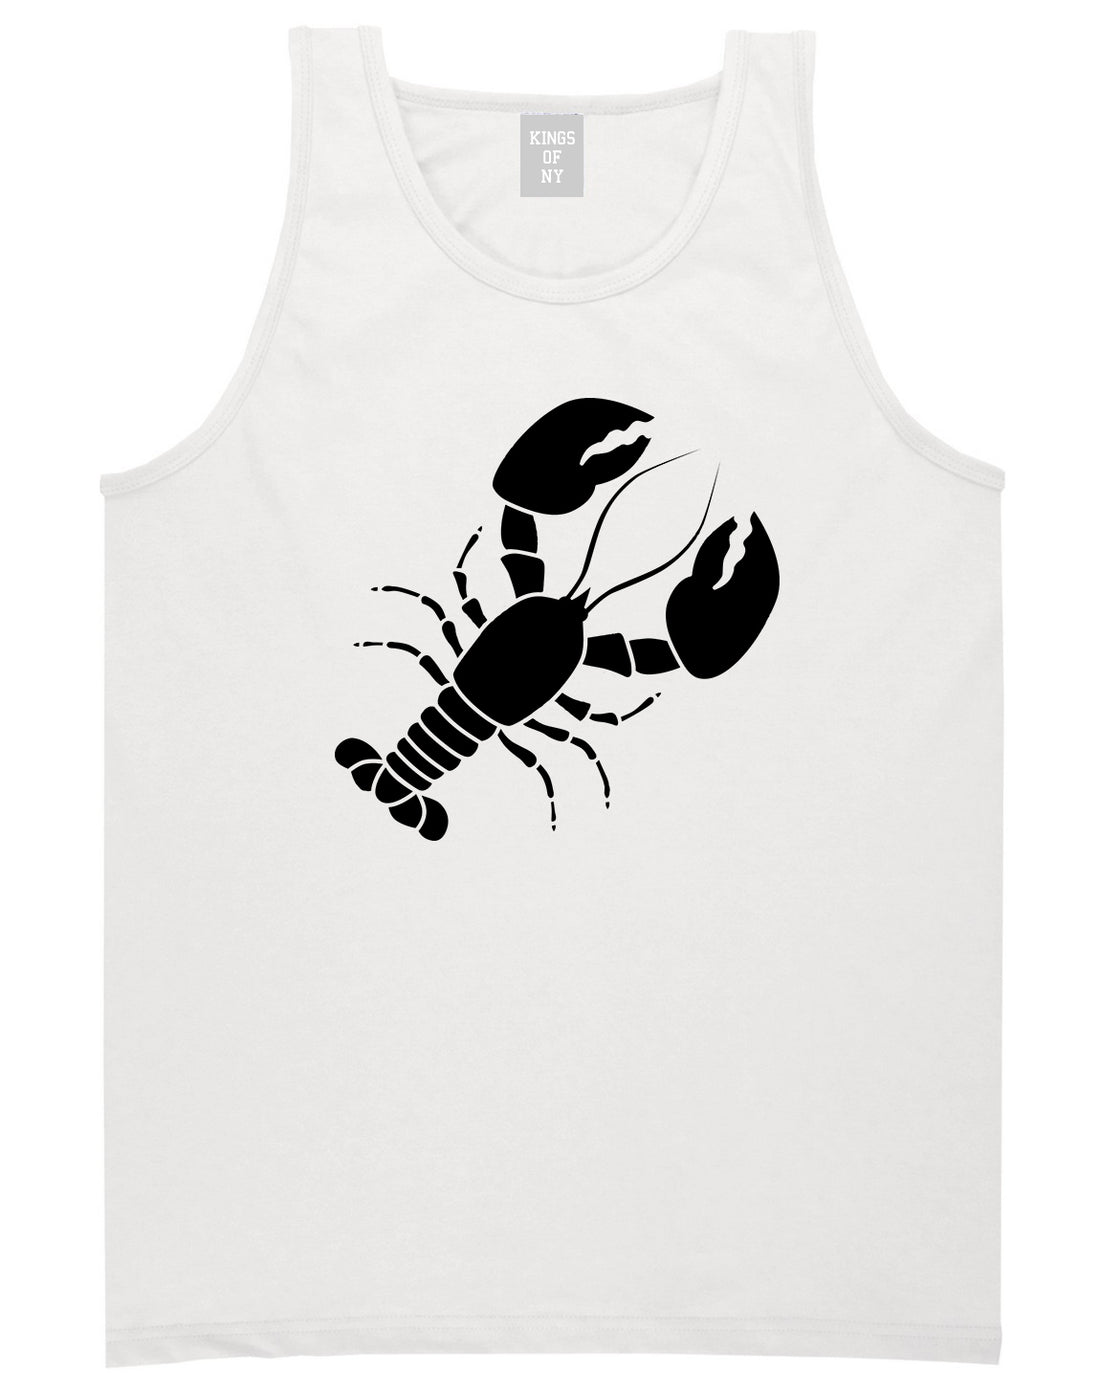 Lobster Mens Tank Top Shirt White by Kings Of NY